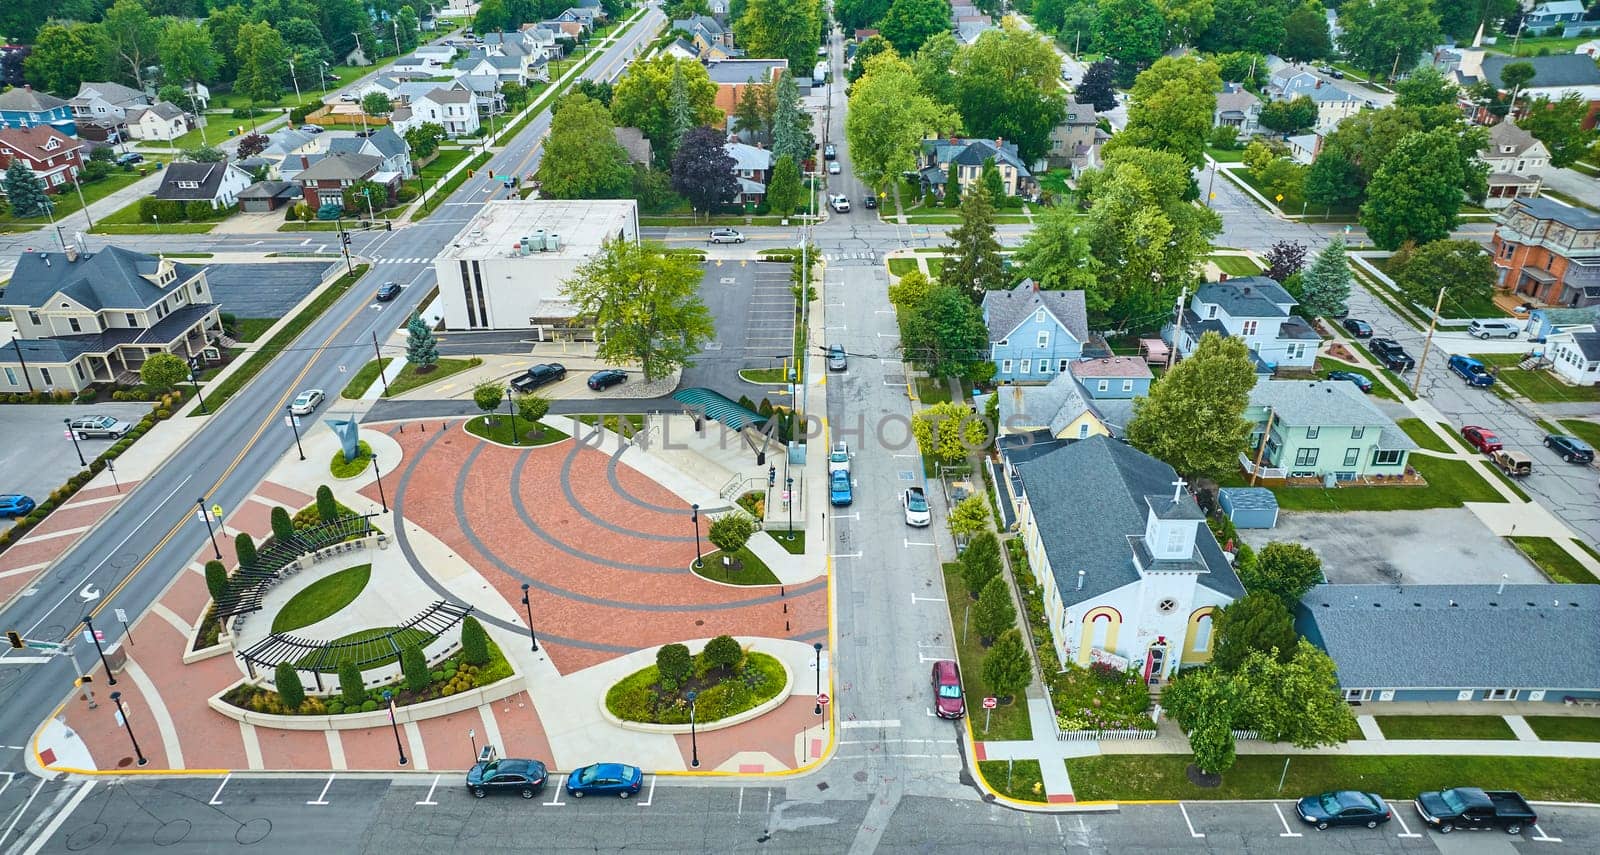 Image of Aerial James Cultural Plaza with church and Auburn houses